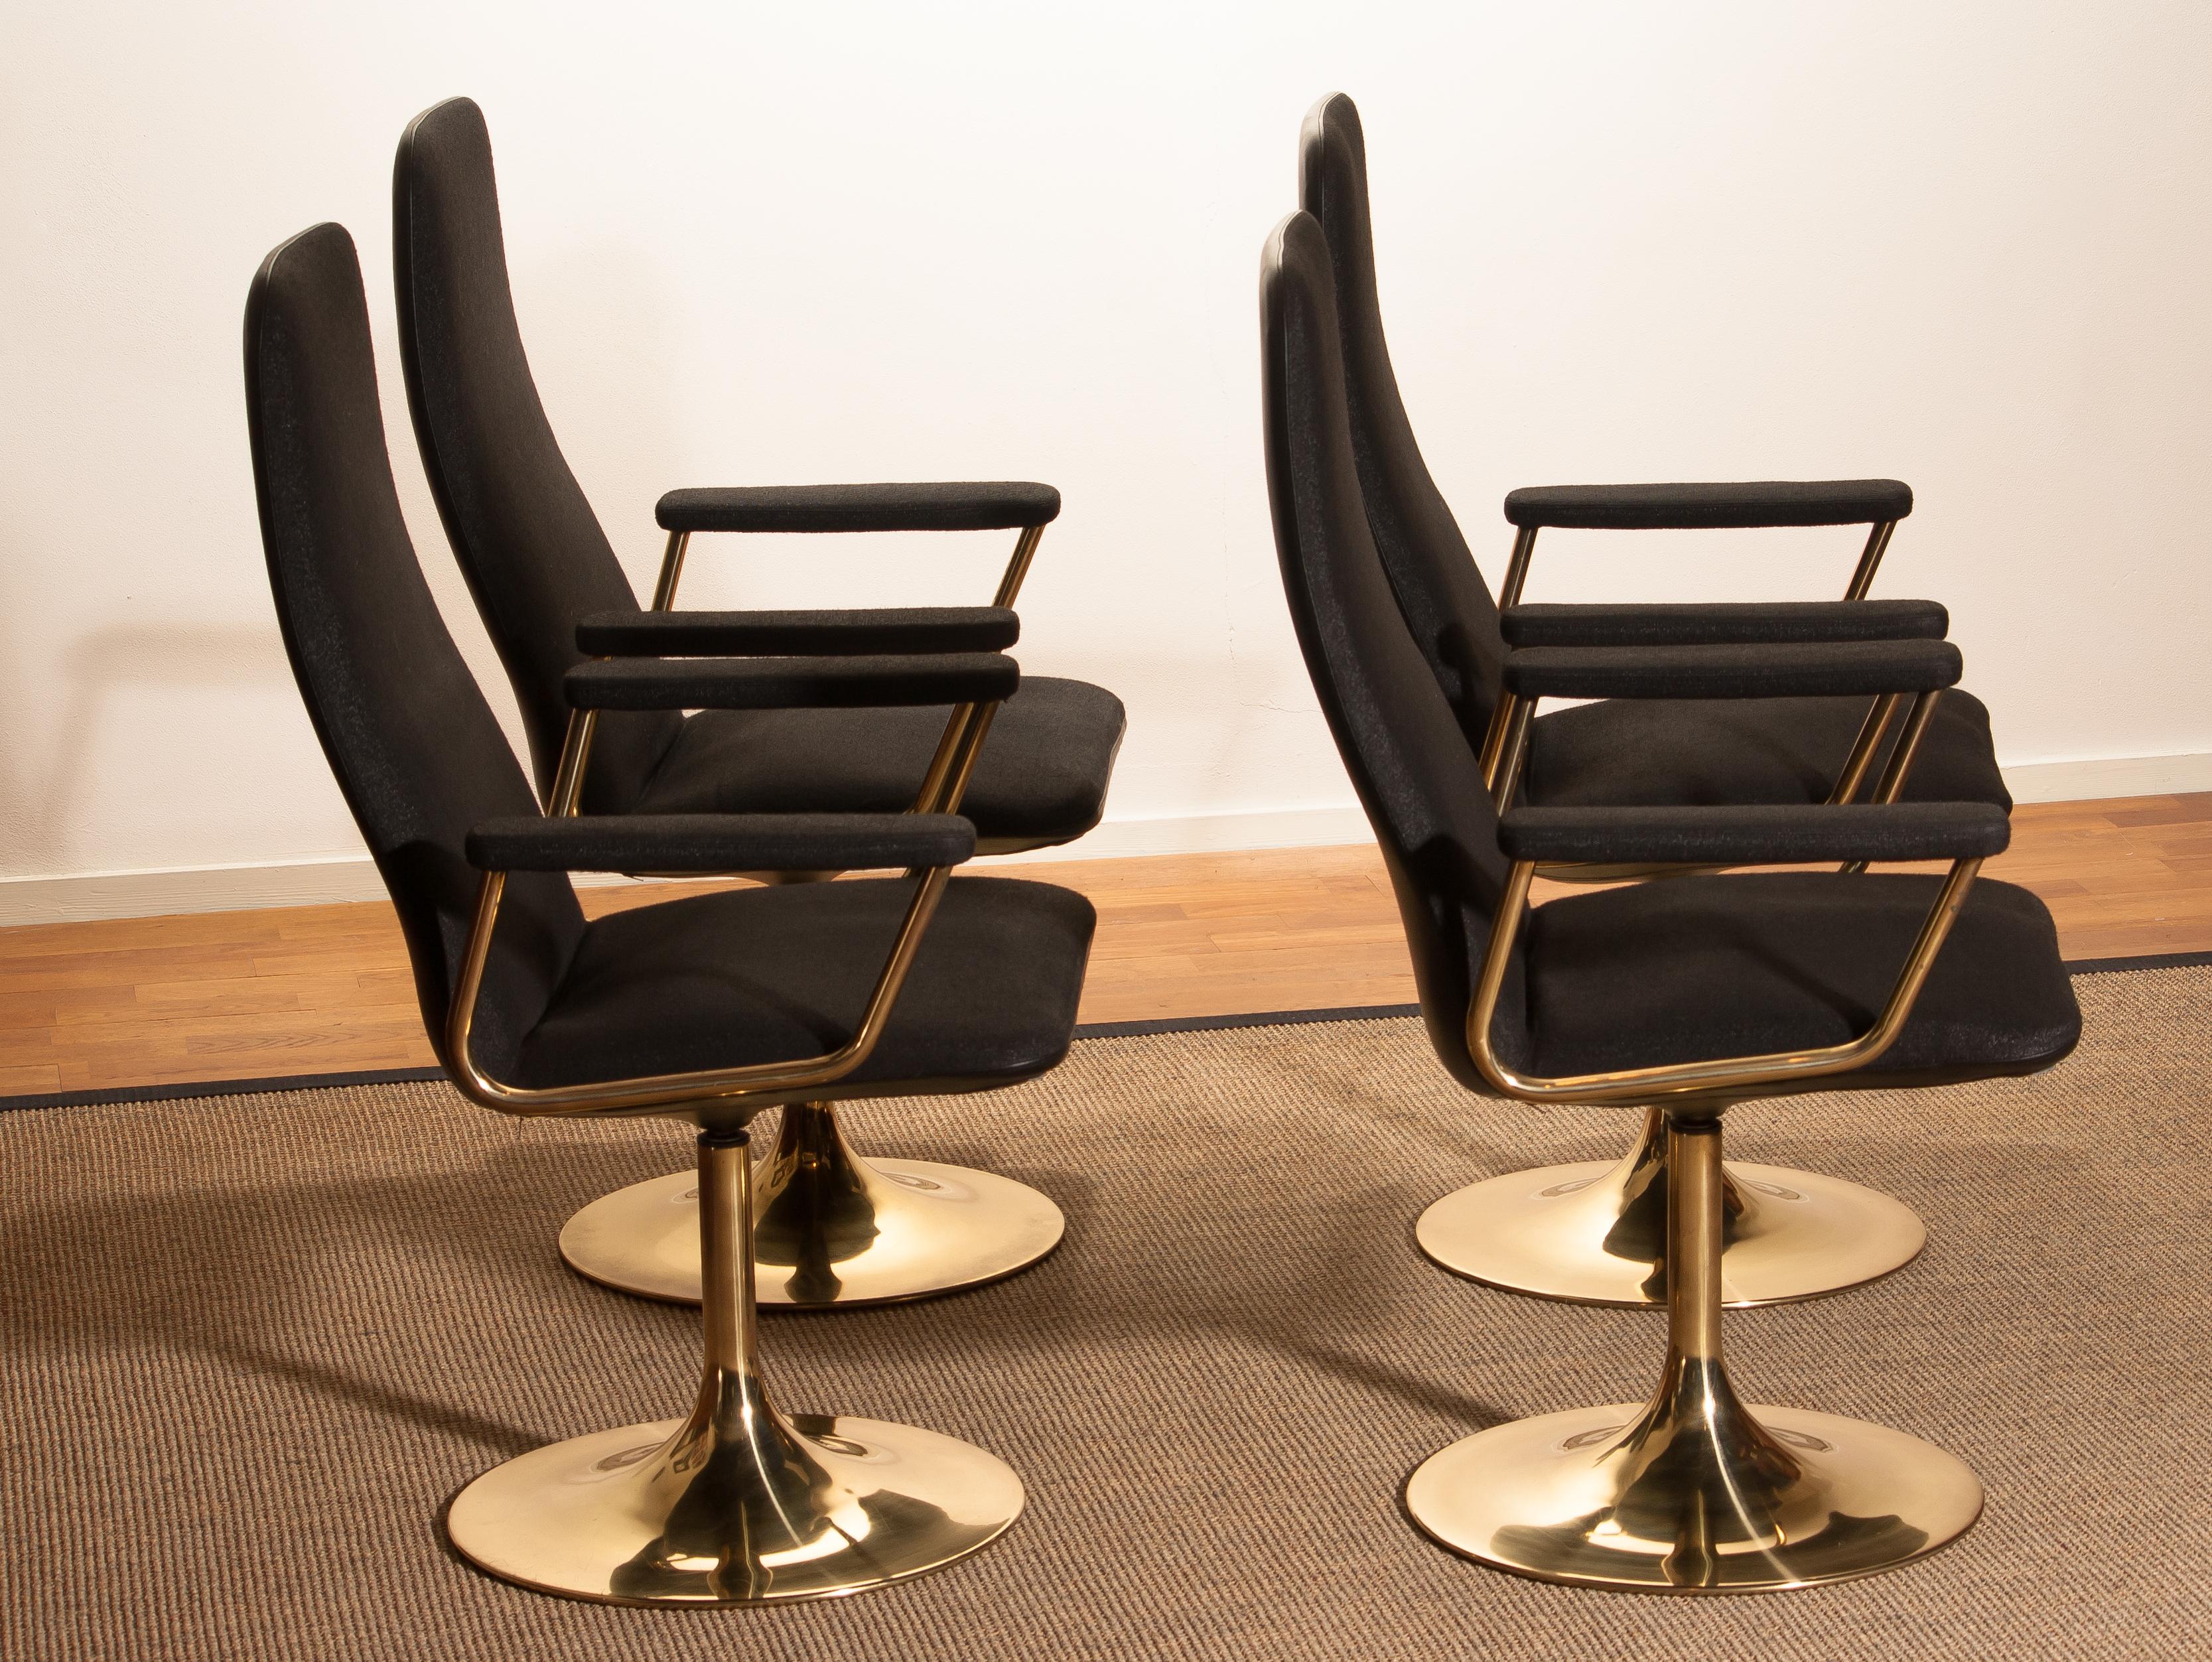 Four Golden, with Black Fabric, Armrest Swivel Chairs by Johanson Design, 1970 4